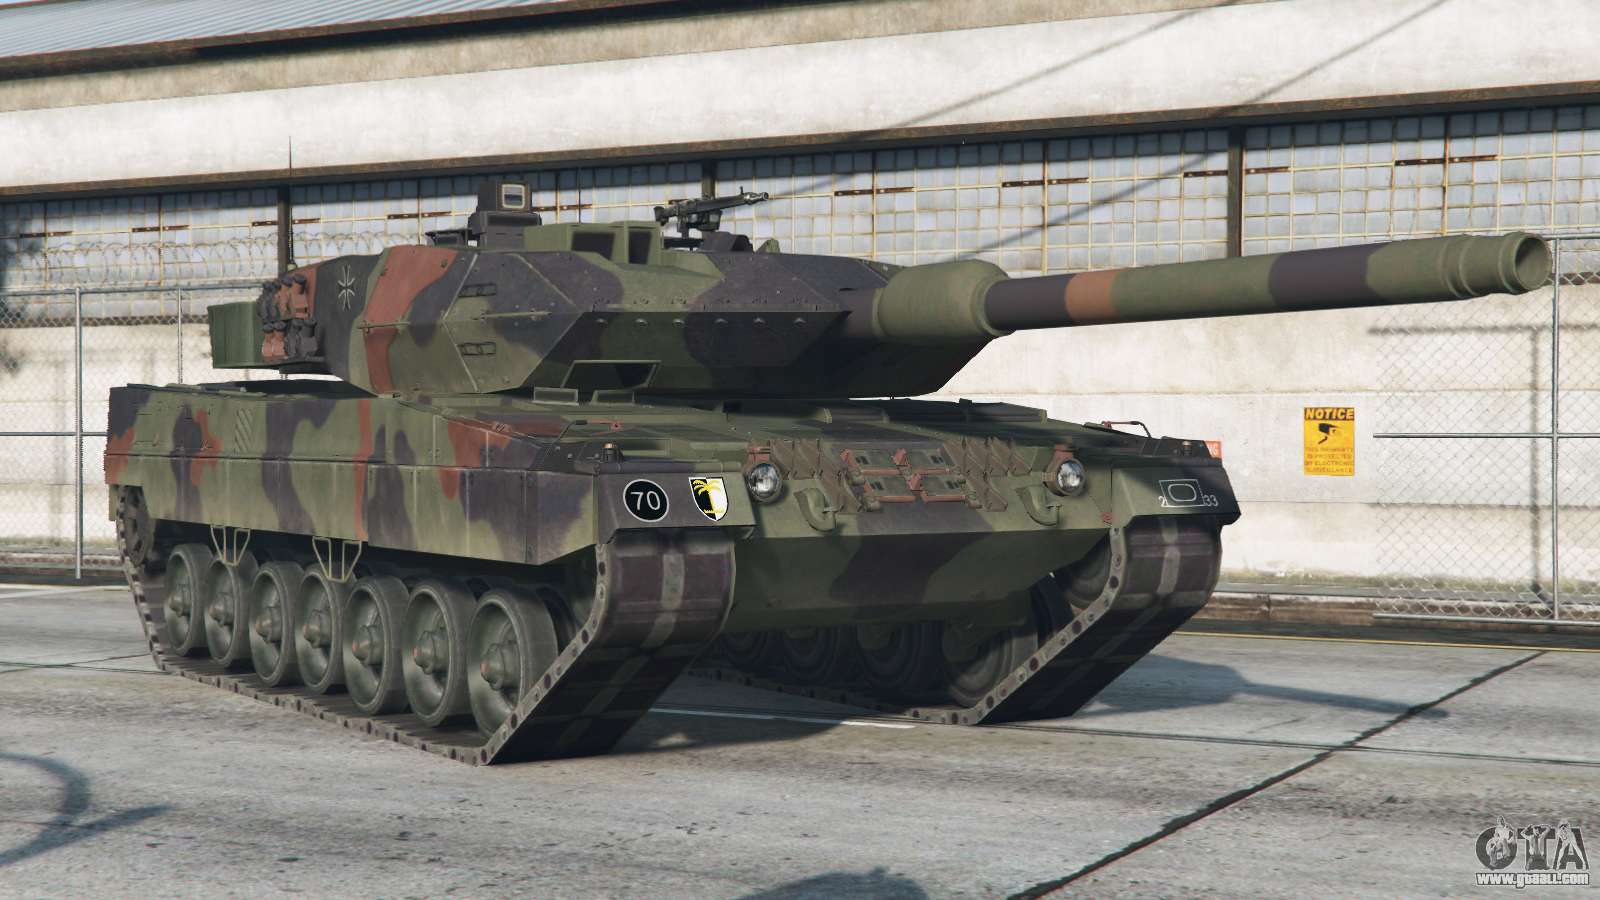 The MoD was offered Leopard 2 tanks on lease